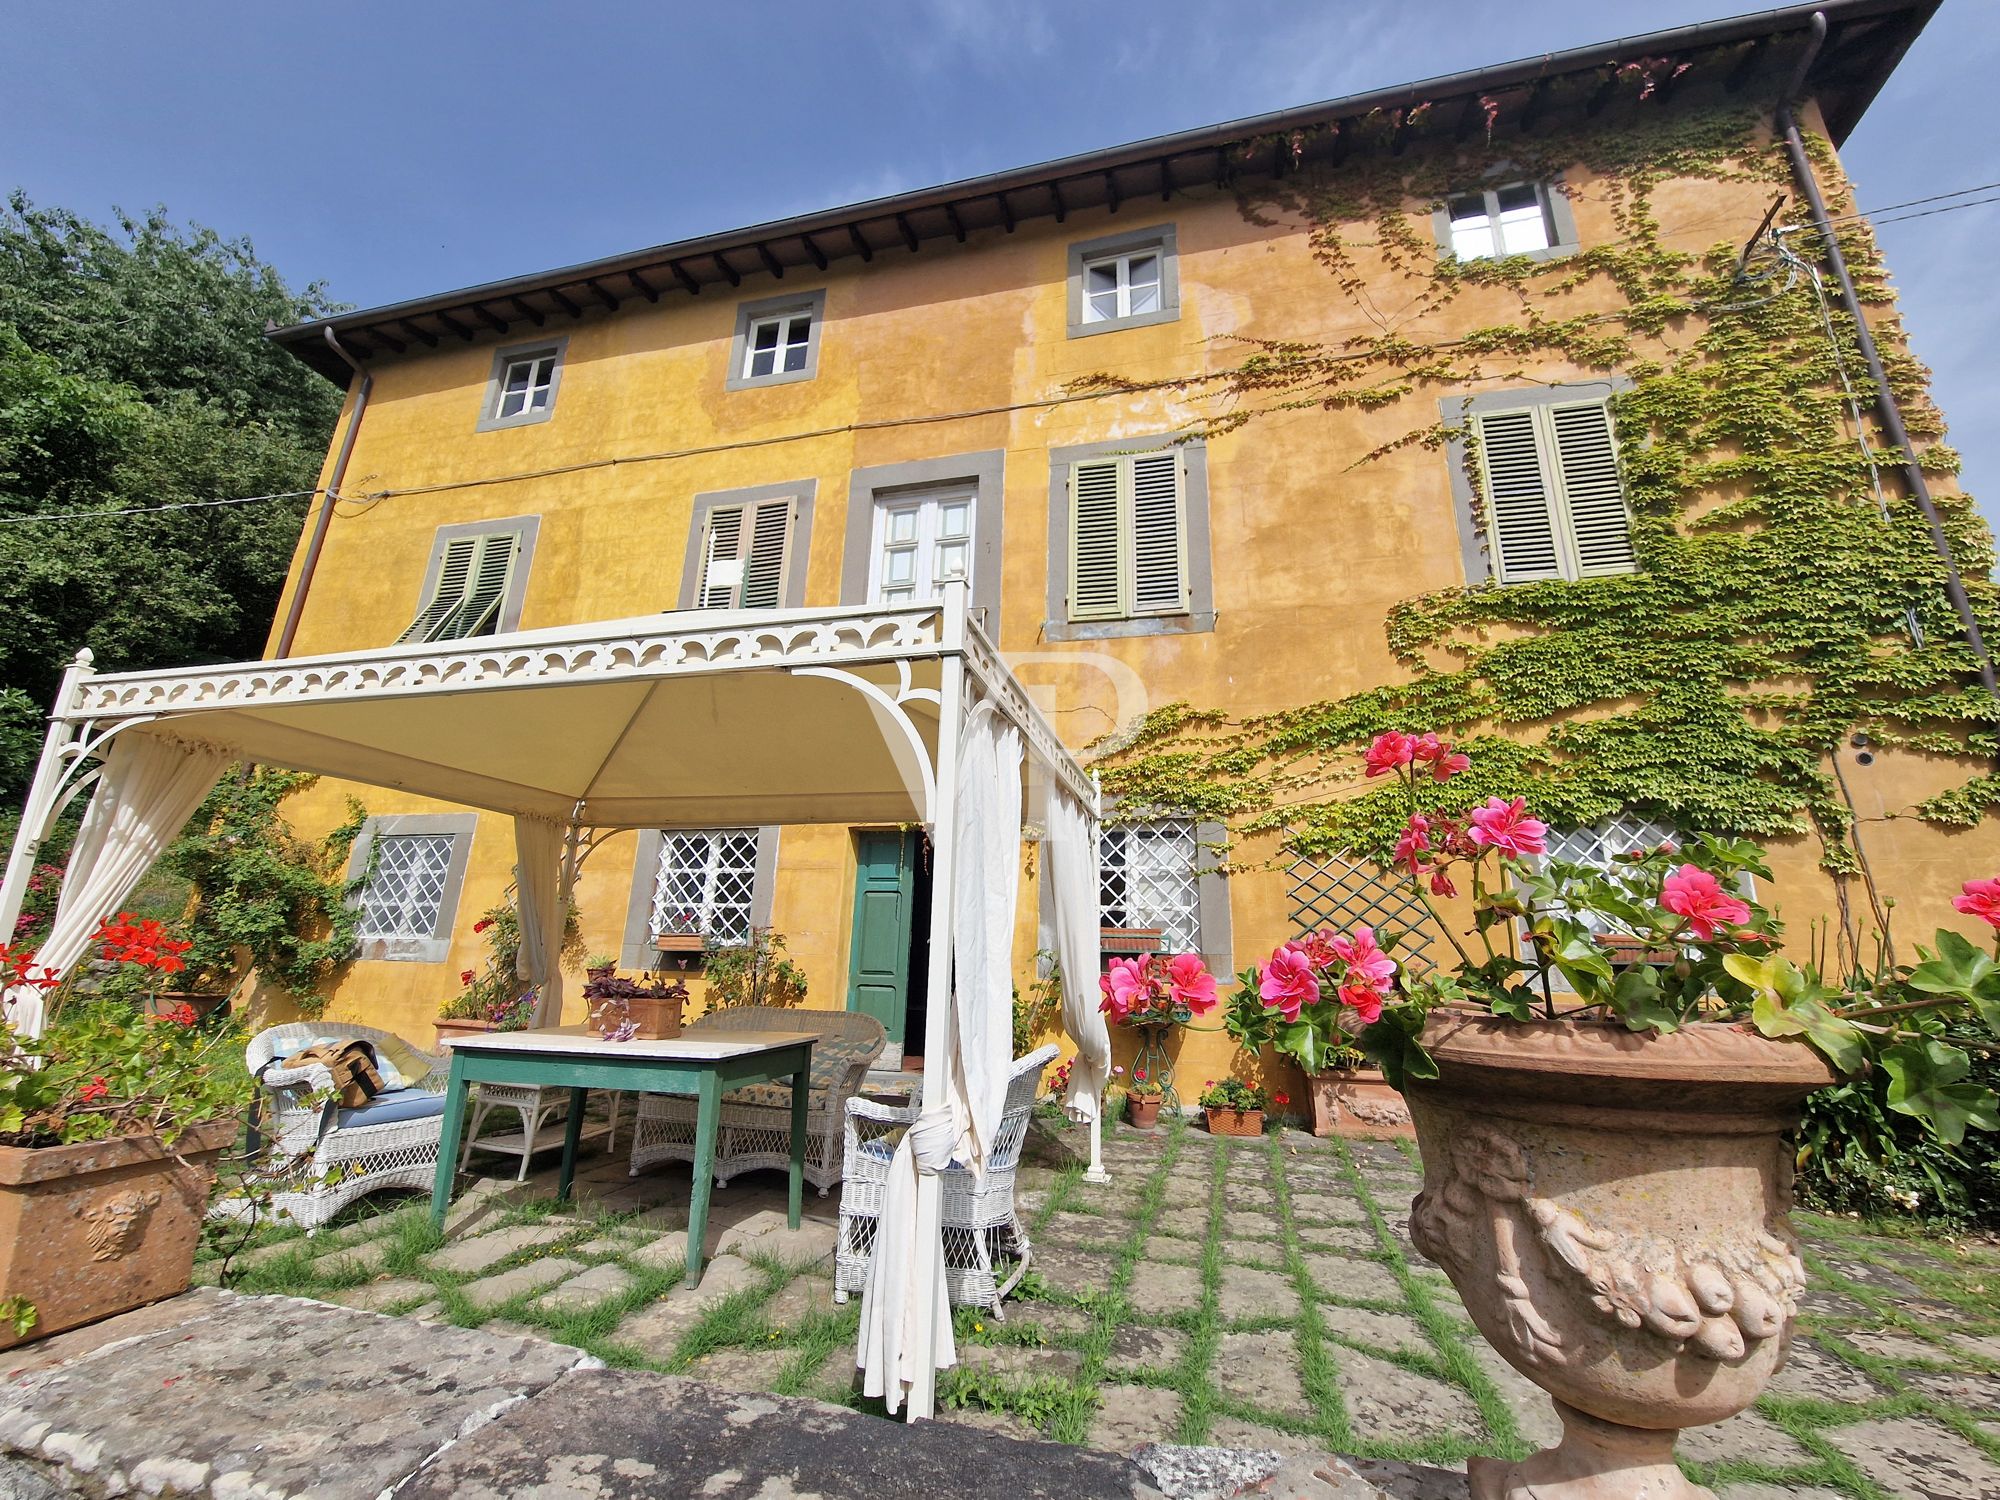 Tereglio Palace - old-fashioned style with great potential